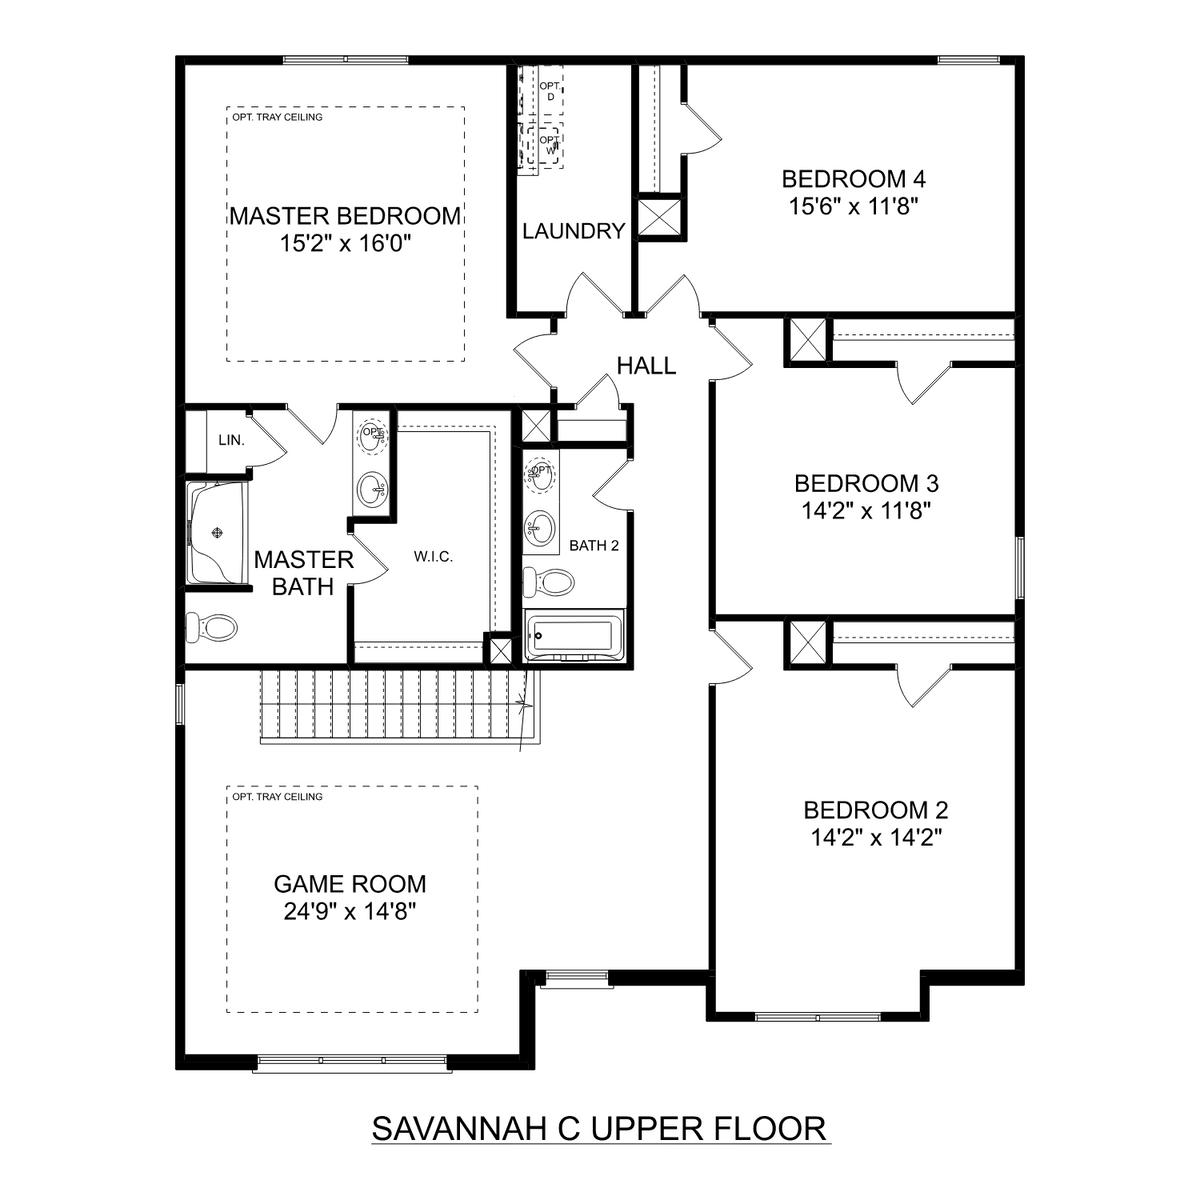 2 - The Savannah C floor plan layout for 169 Cherry Laurel Drive in Davidson Homes' Clearview community.